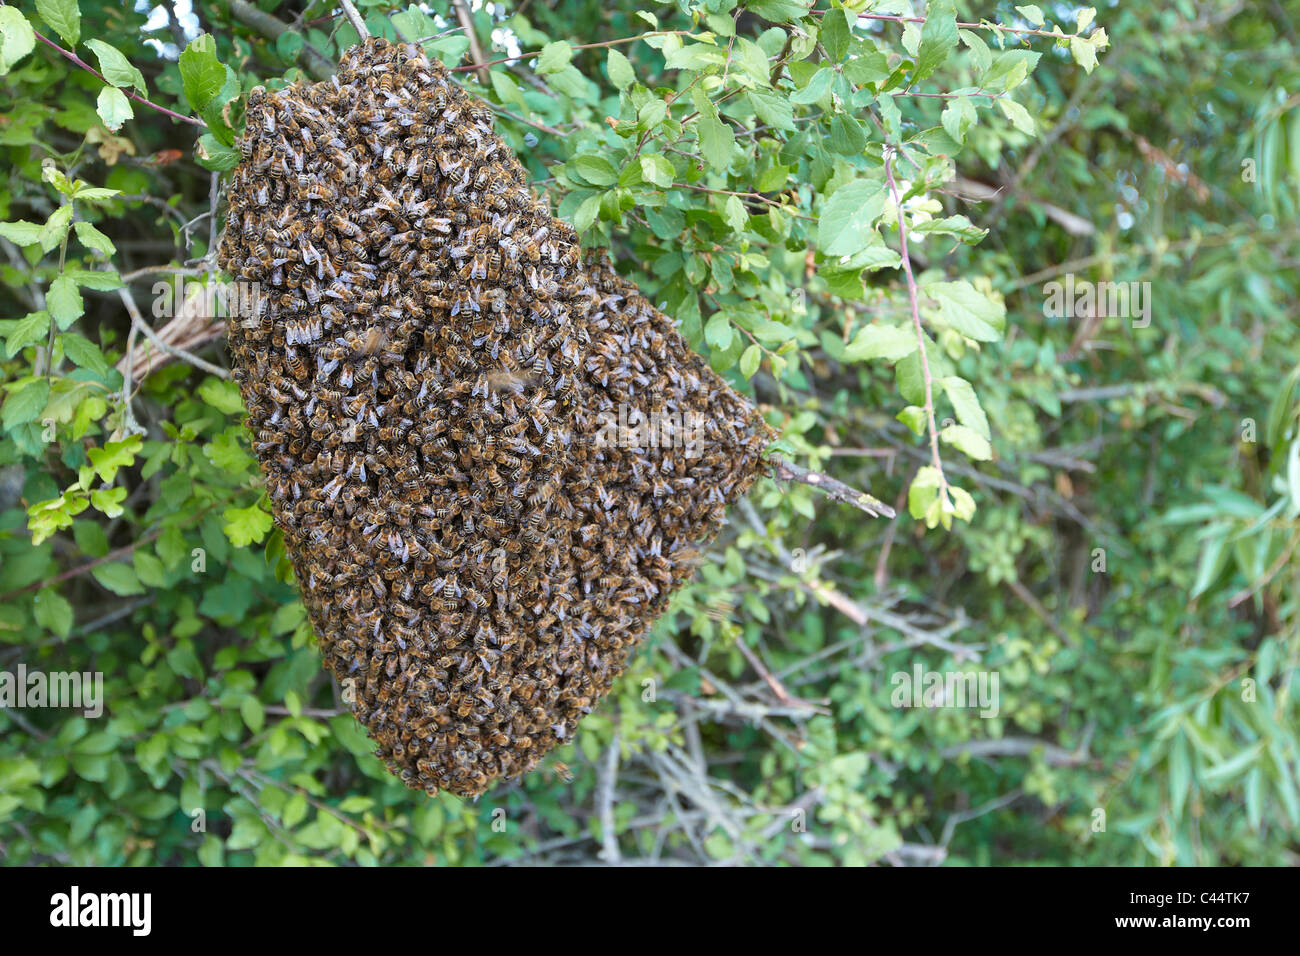 Honey bees swarming in a hedgerow, East Yorkshire, UK. Swarm of bees Stock Photo